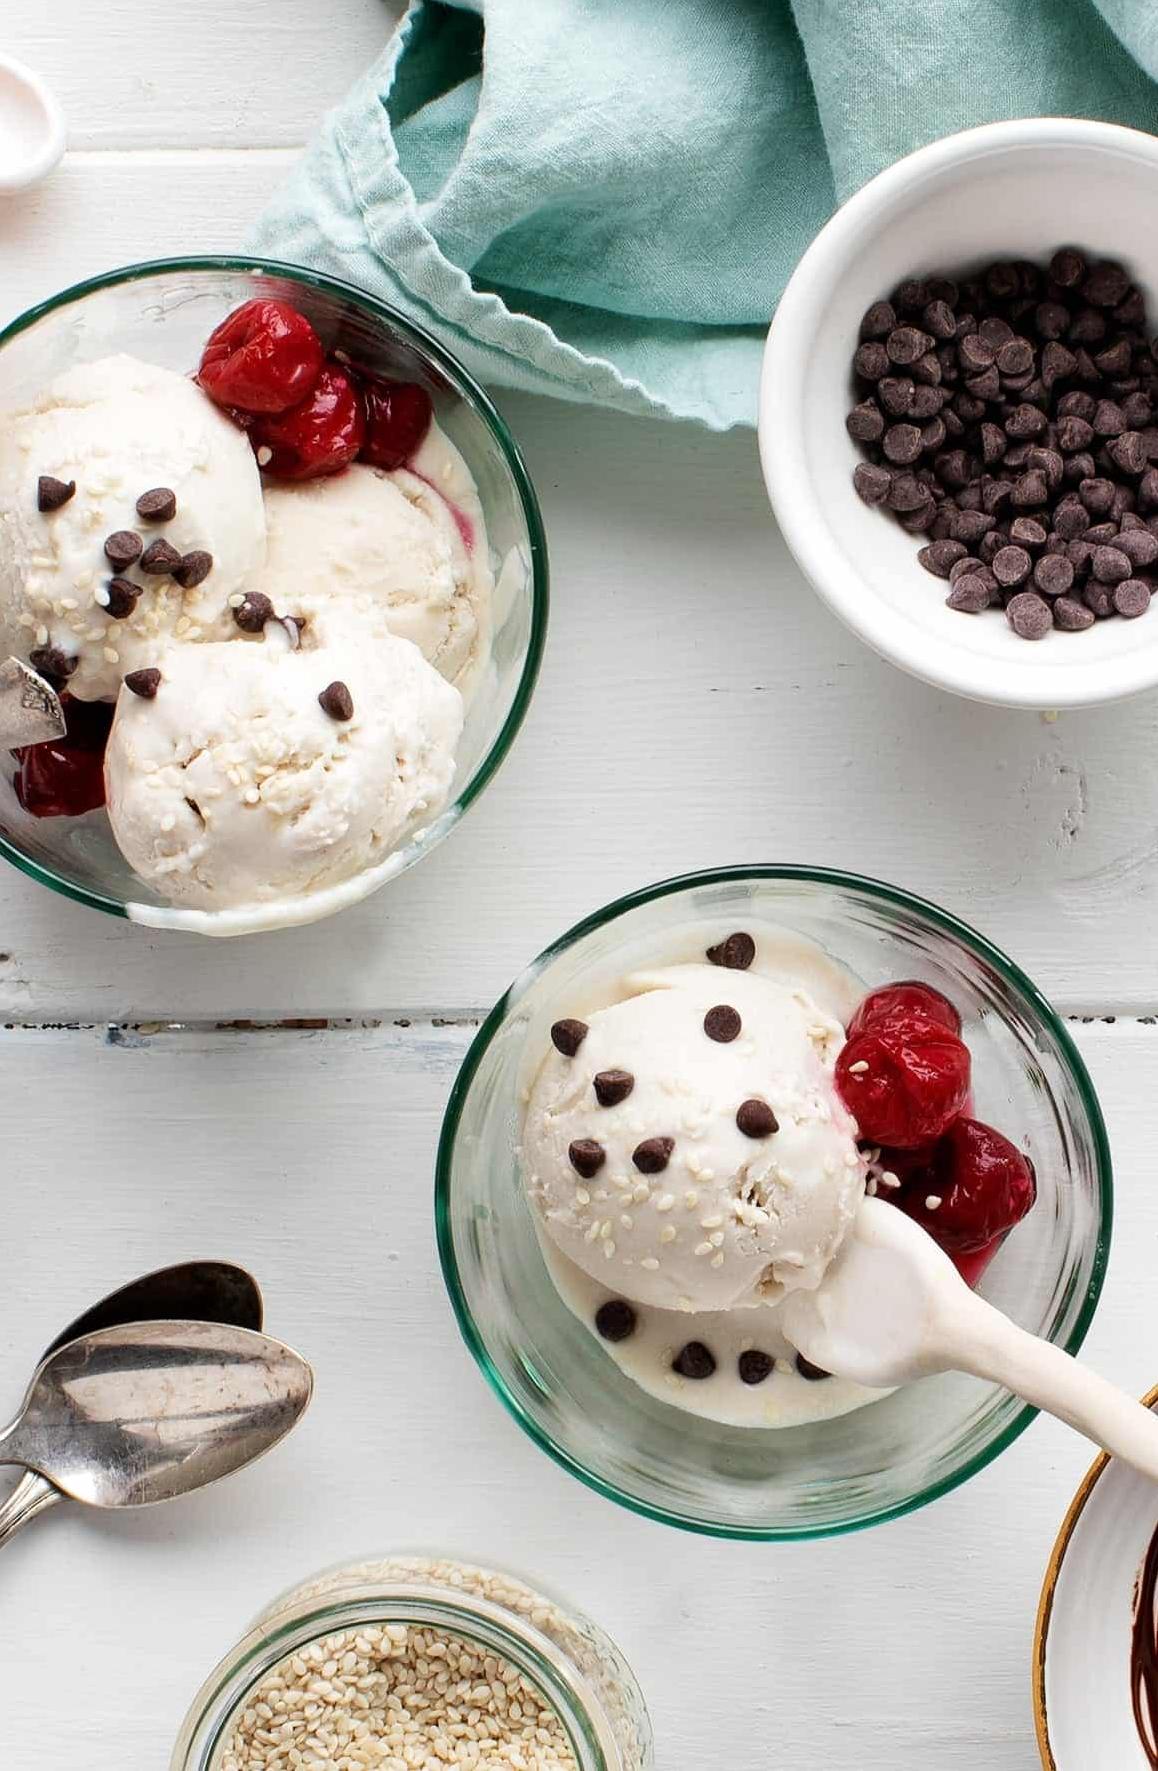  Say goodbye to dairy and hello to our vegan ice cream.